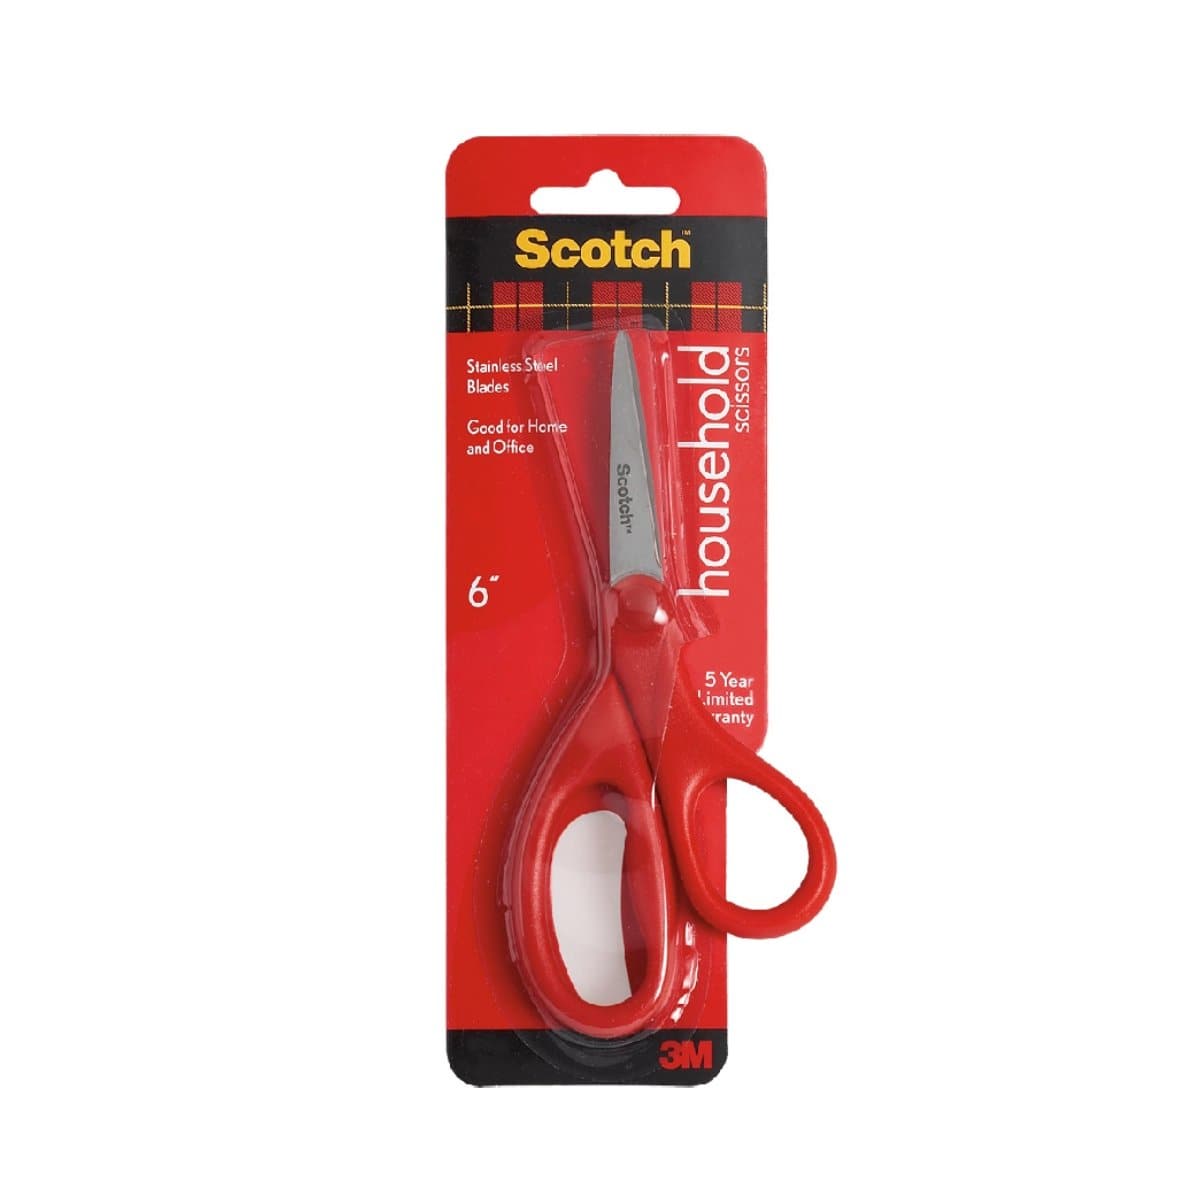 3M Scotch Home and Office Scissors 7 inches